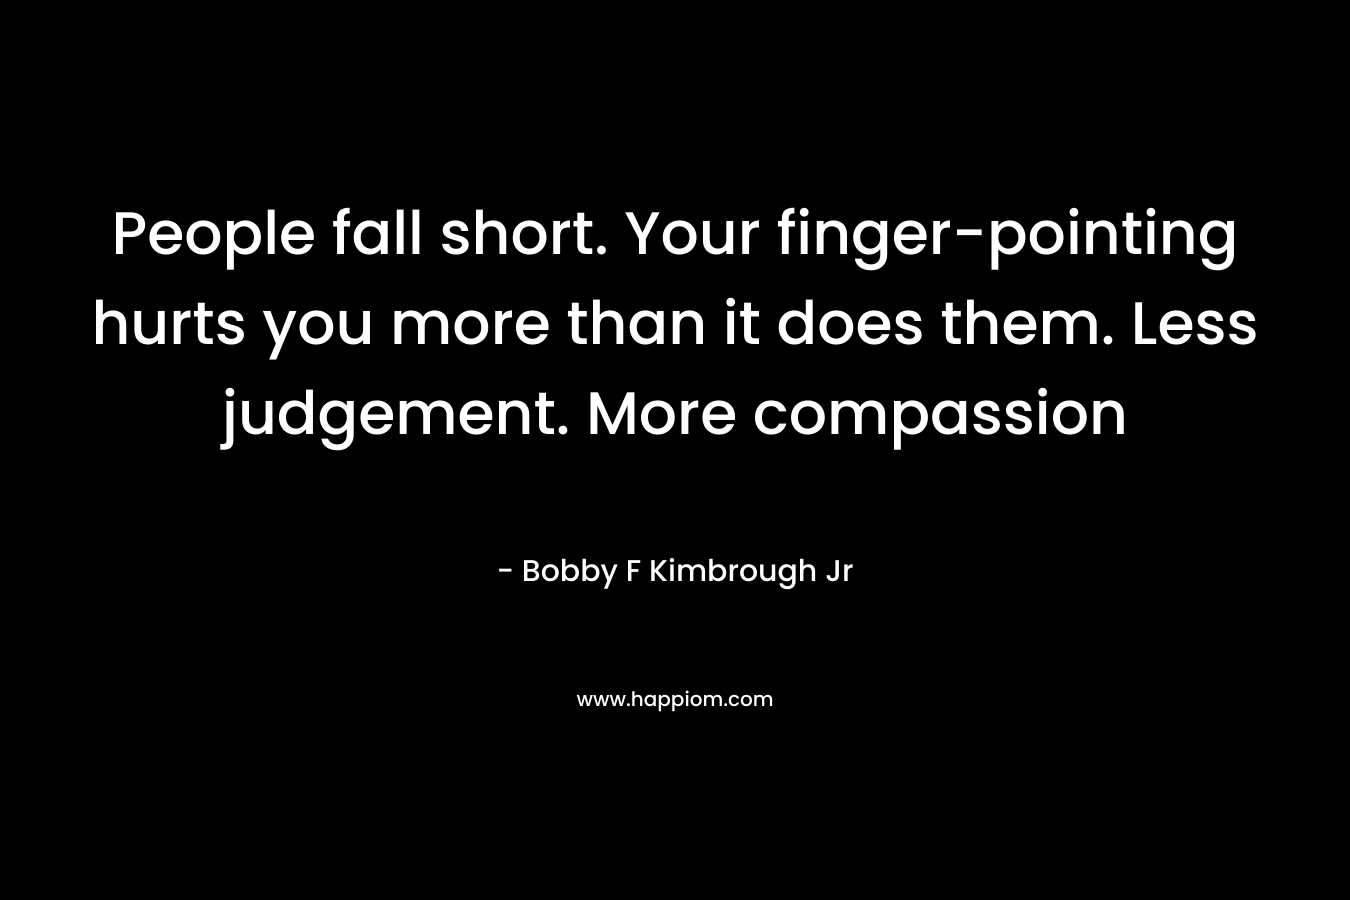 People fall short. Your finger-pointing hurts you more than it does them. Less judgement. More compassion – Bobby F Kimbrough Jr